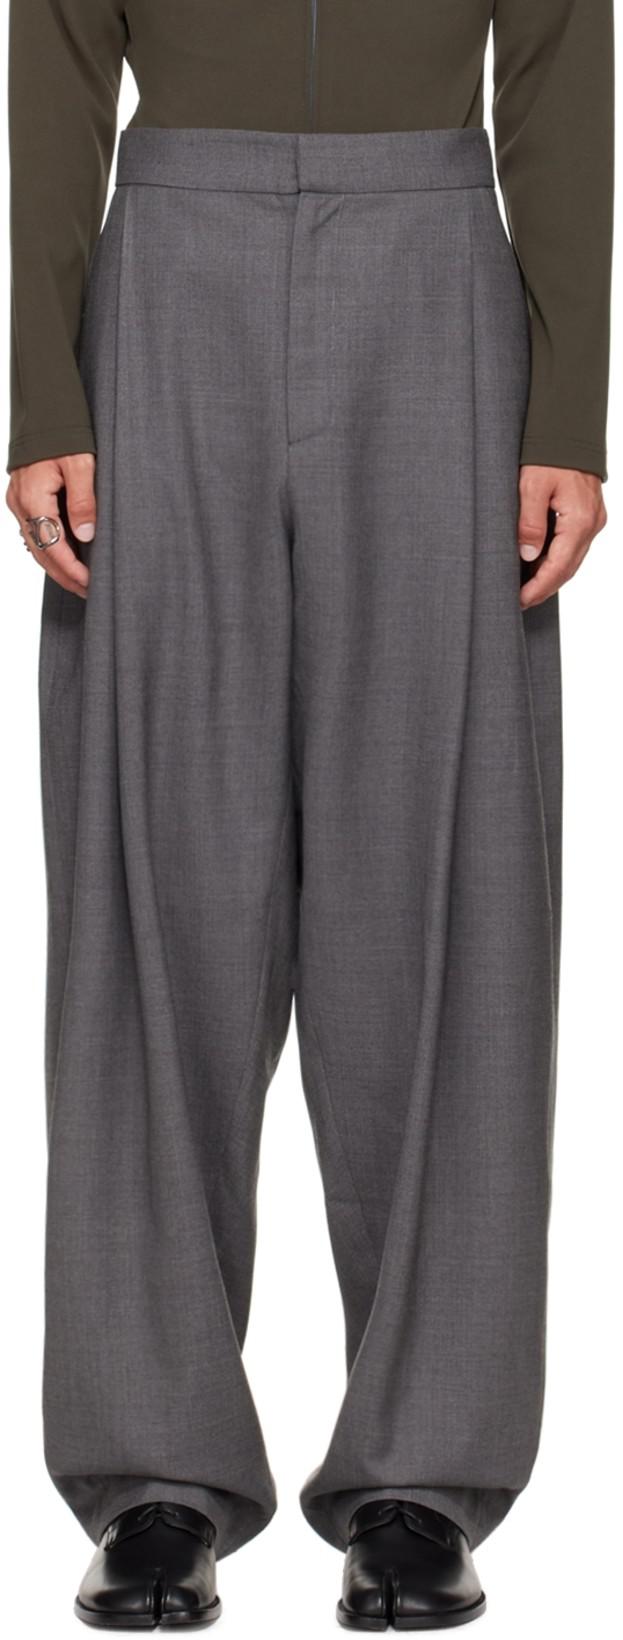 SSENSE Exclusive Gray Cord Trousers by AARON ESH